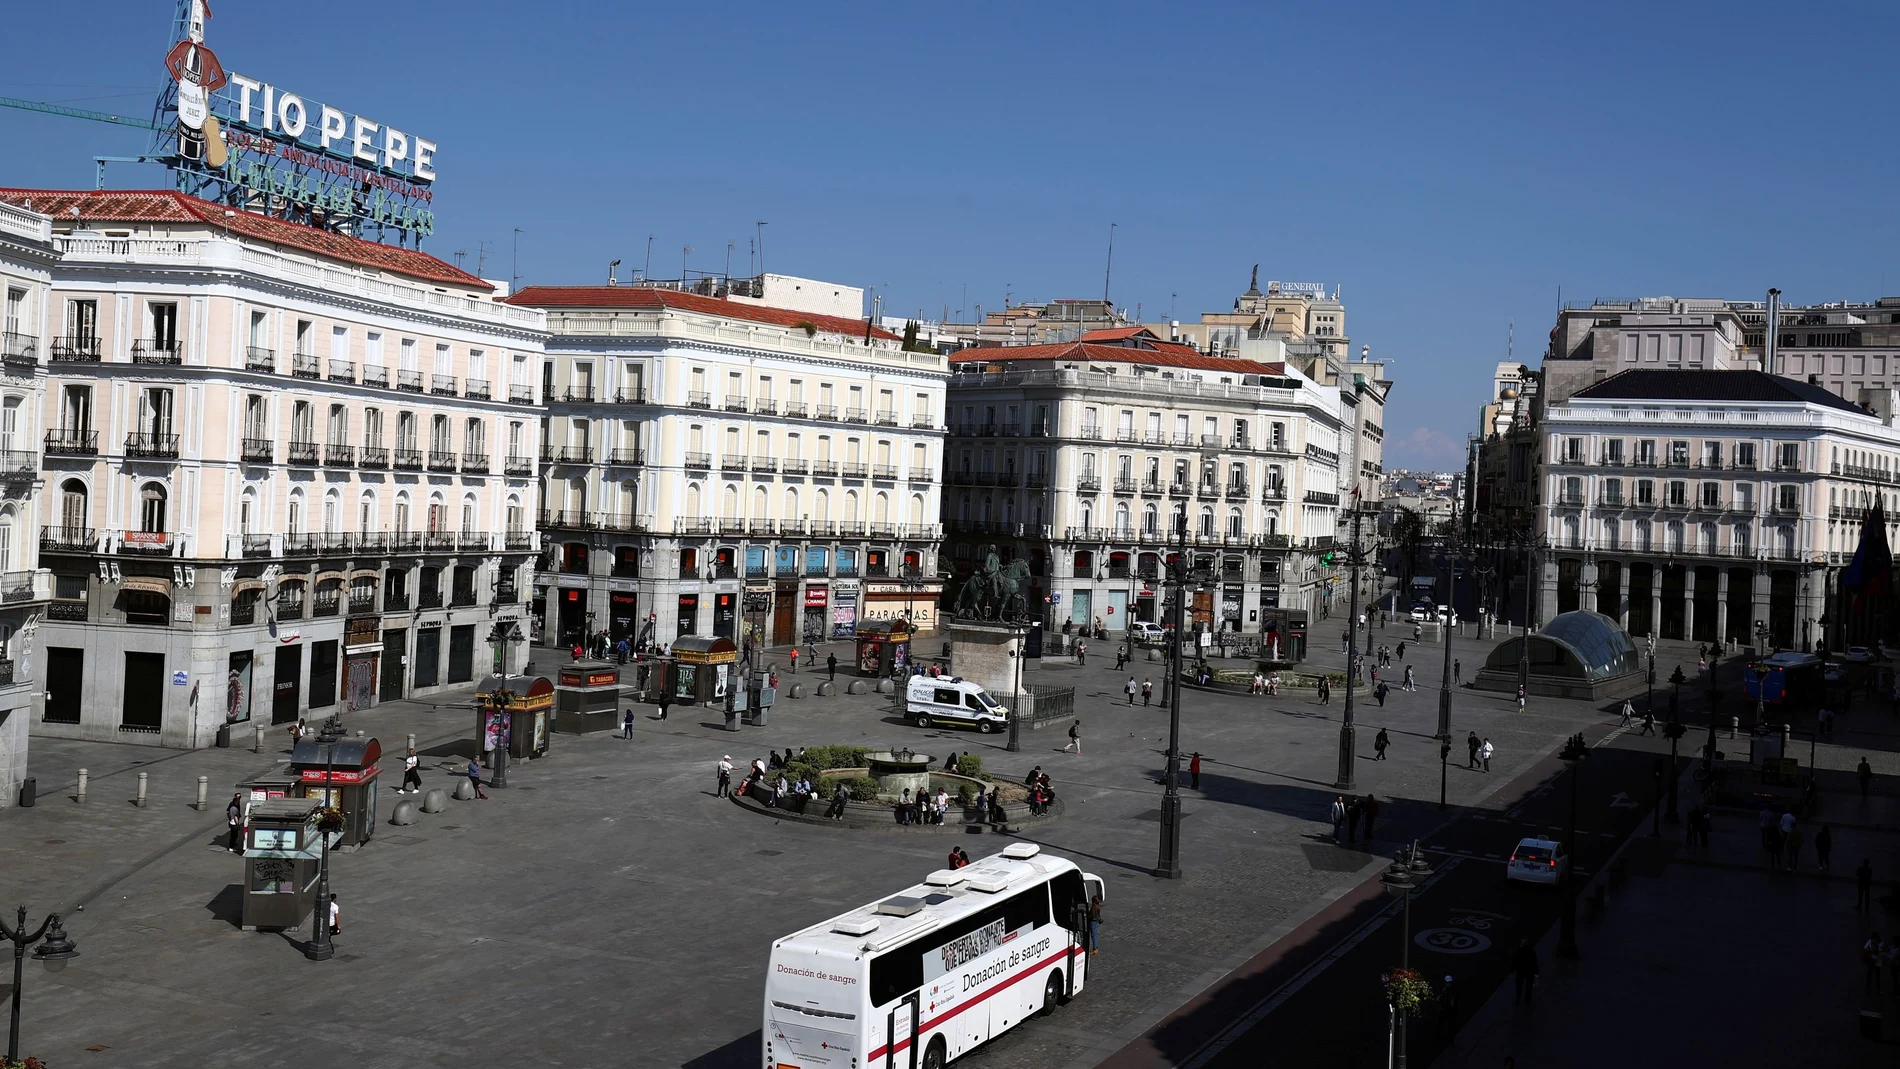 General view of the famous landmark Puerta del Sol with few people due to the coronavirus outbreak in central Madrid